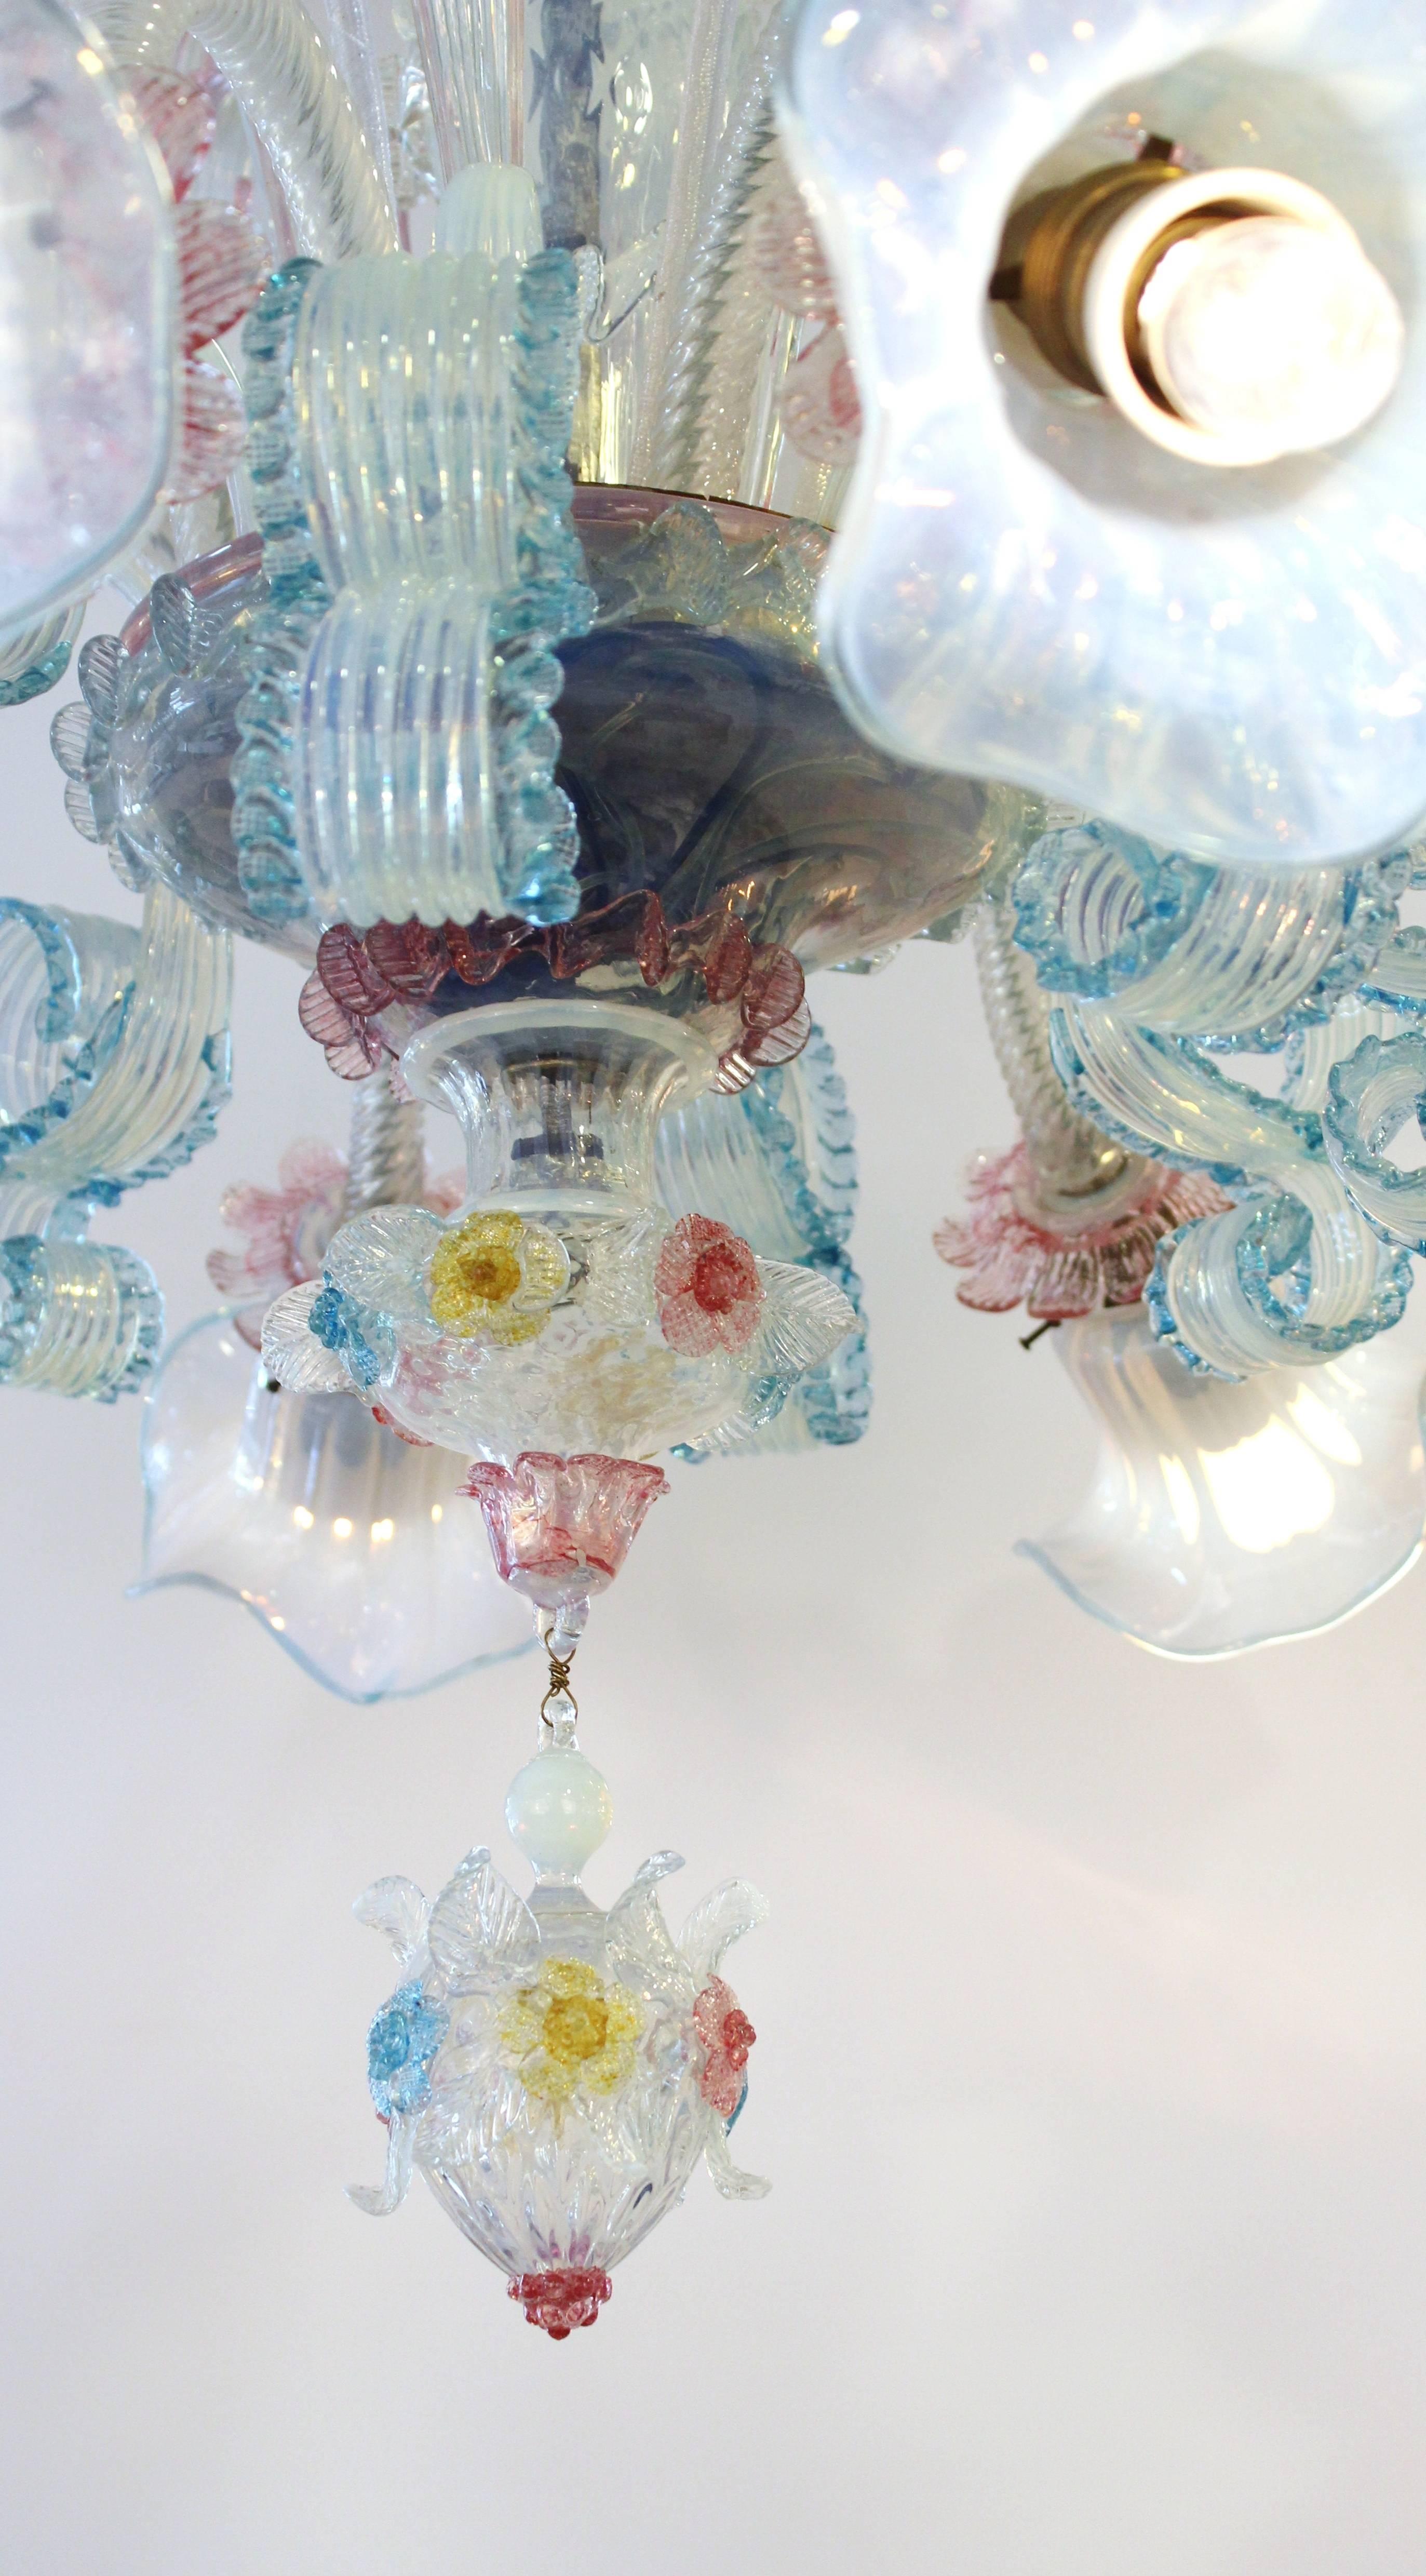 Venetian Murano blown glass chandelier, produced 19th century, featuring floral motifs and decorative scrolls in pale opaline with pink, yellow and blue accents, eight arms terminating in lily form shades. Wired to US standard. Excellent antique